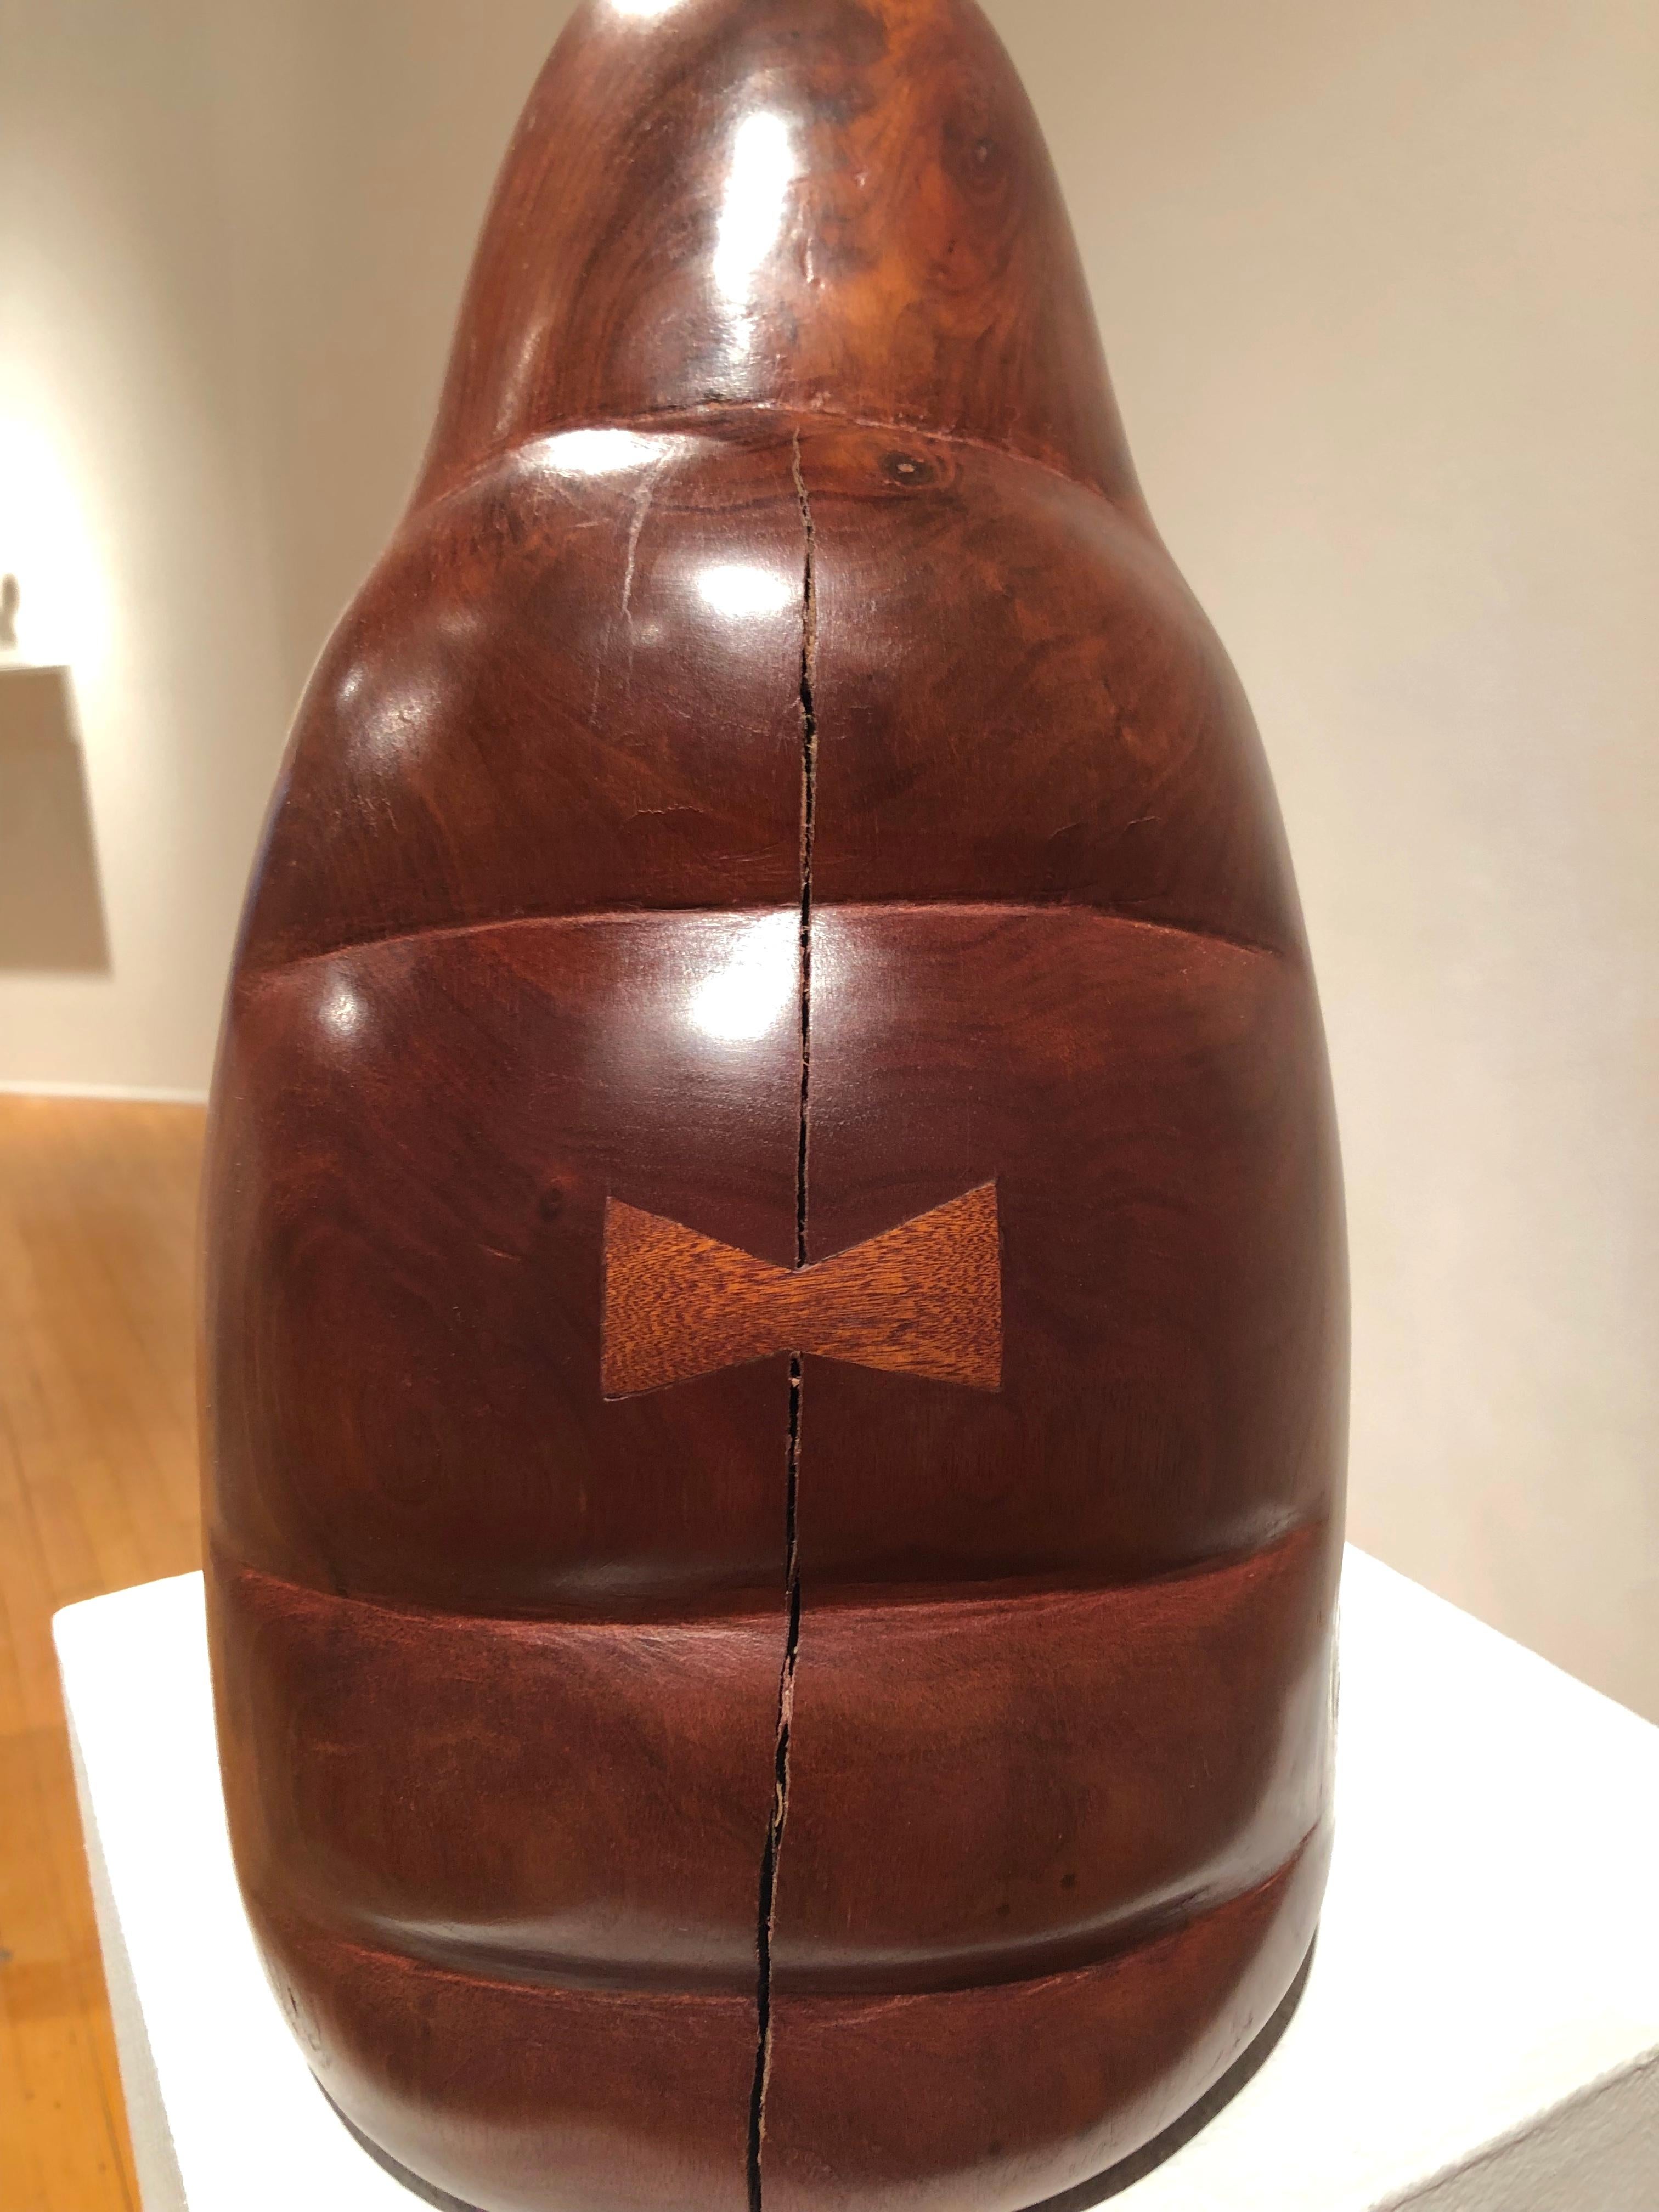 The Wrangler, 2018
walnut

Hand carved organic abstract sculpture made using reclaimed wood. Features bow tie splines.

John Maloof (of Vivian Maier fame) is an artist based in Chicago. The gallery is pleased to present his new body of work in